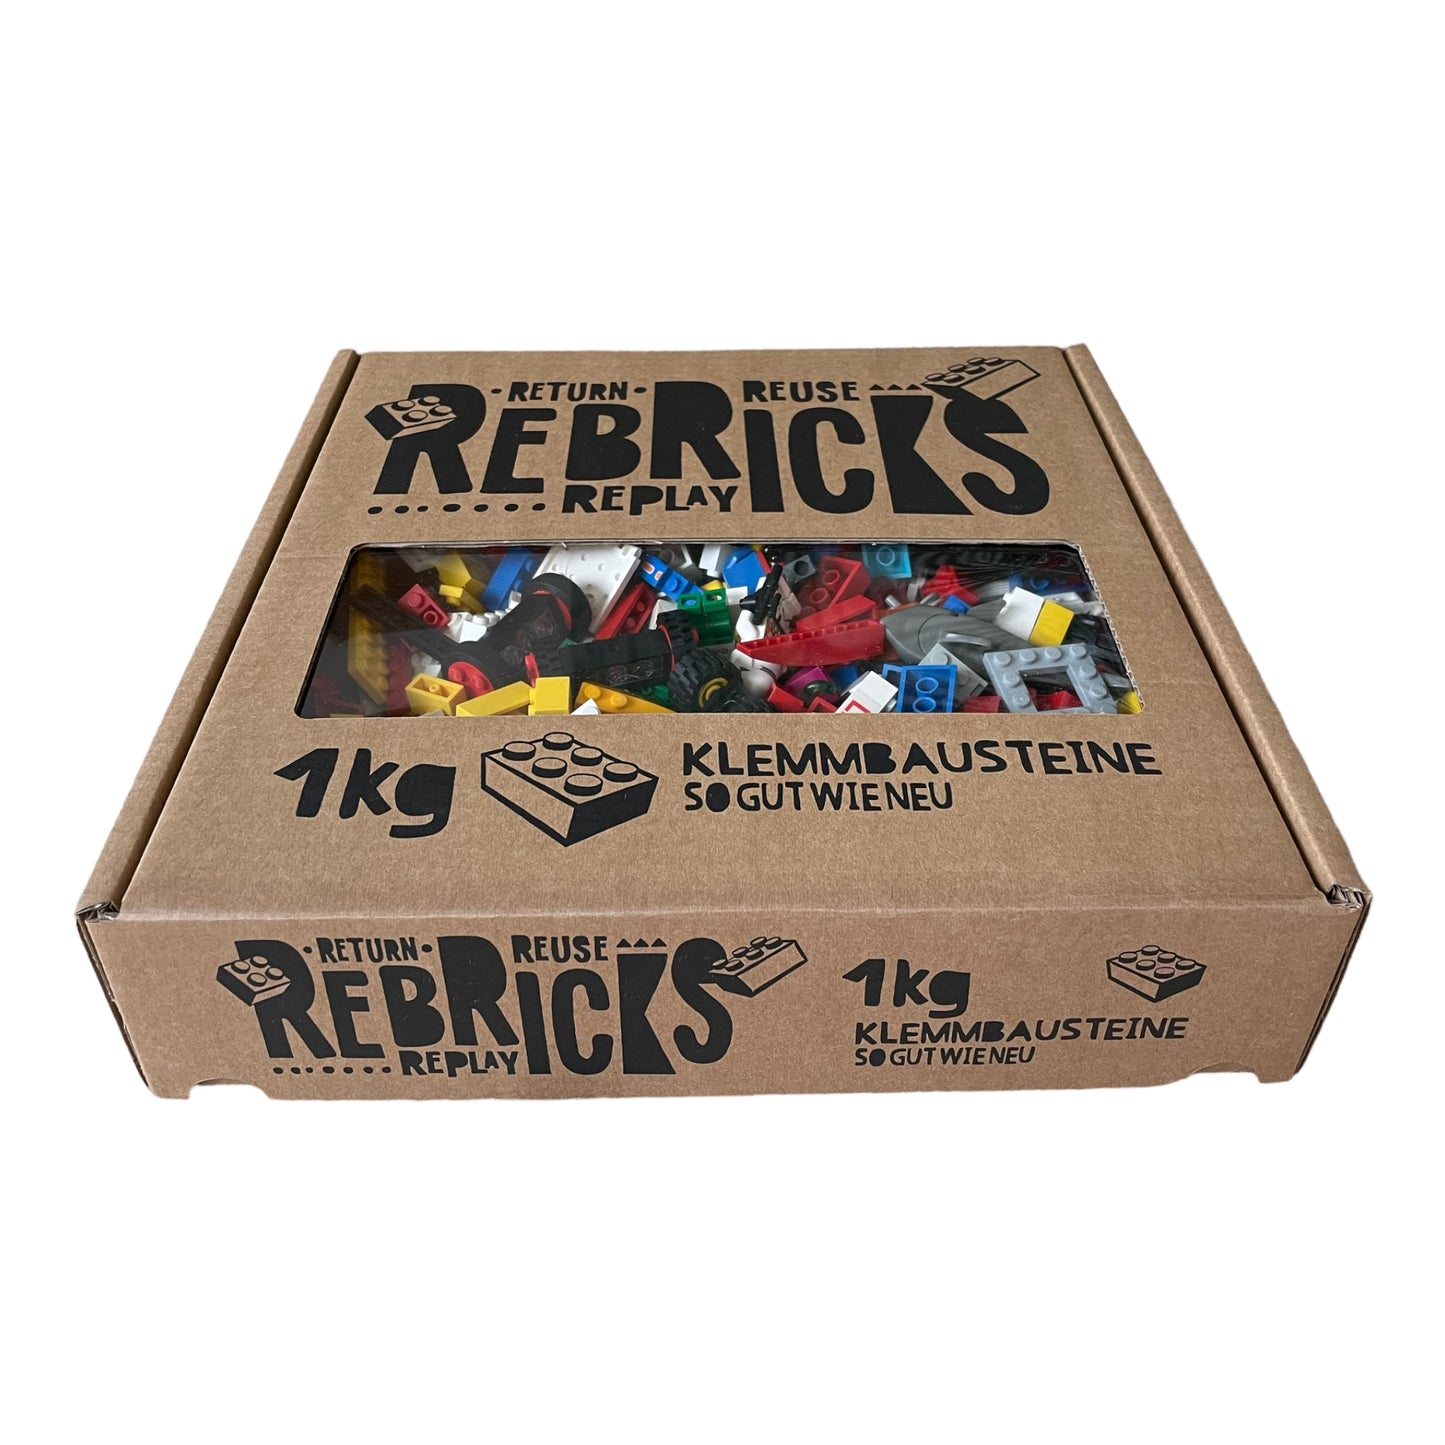 Rebricks - Box of 1 kilo of used, cleaned building blocks from Lego® or other compatible brands. As good as new !